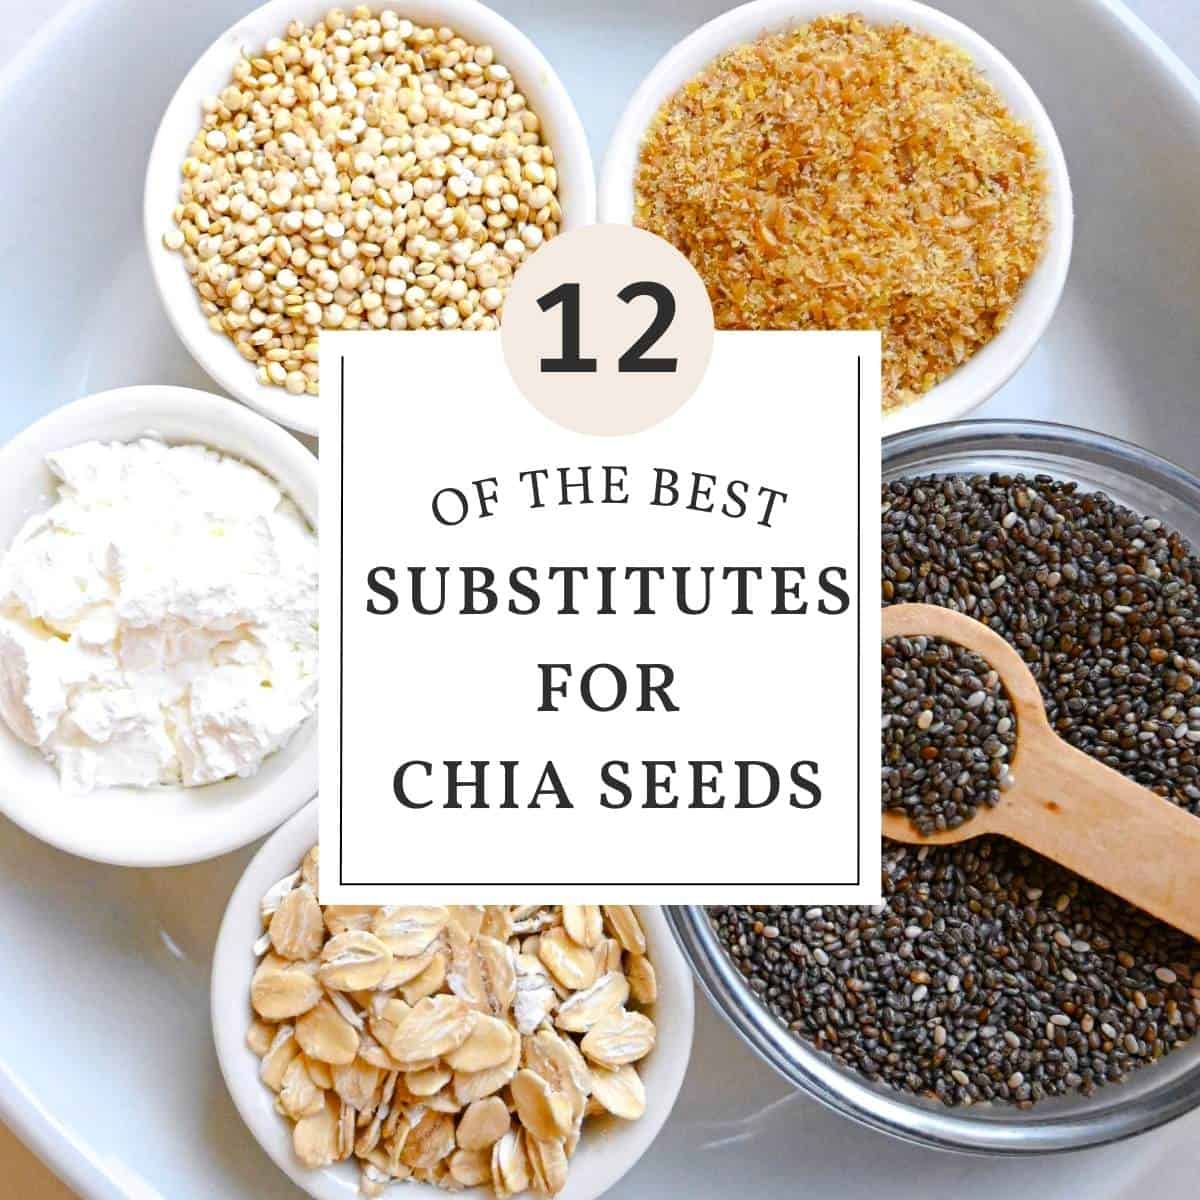 12 of the best substitutes for chia seeds, picture of chia seeds oats, corn starch, seeds and flaxseeds